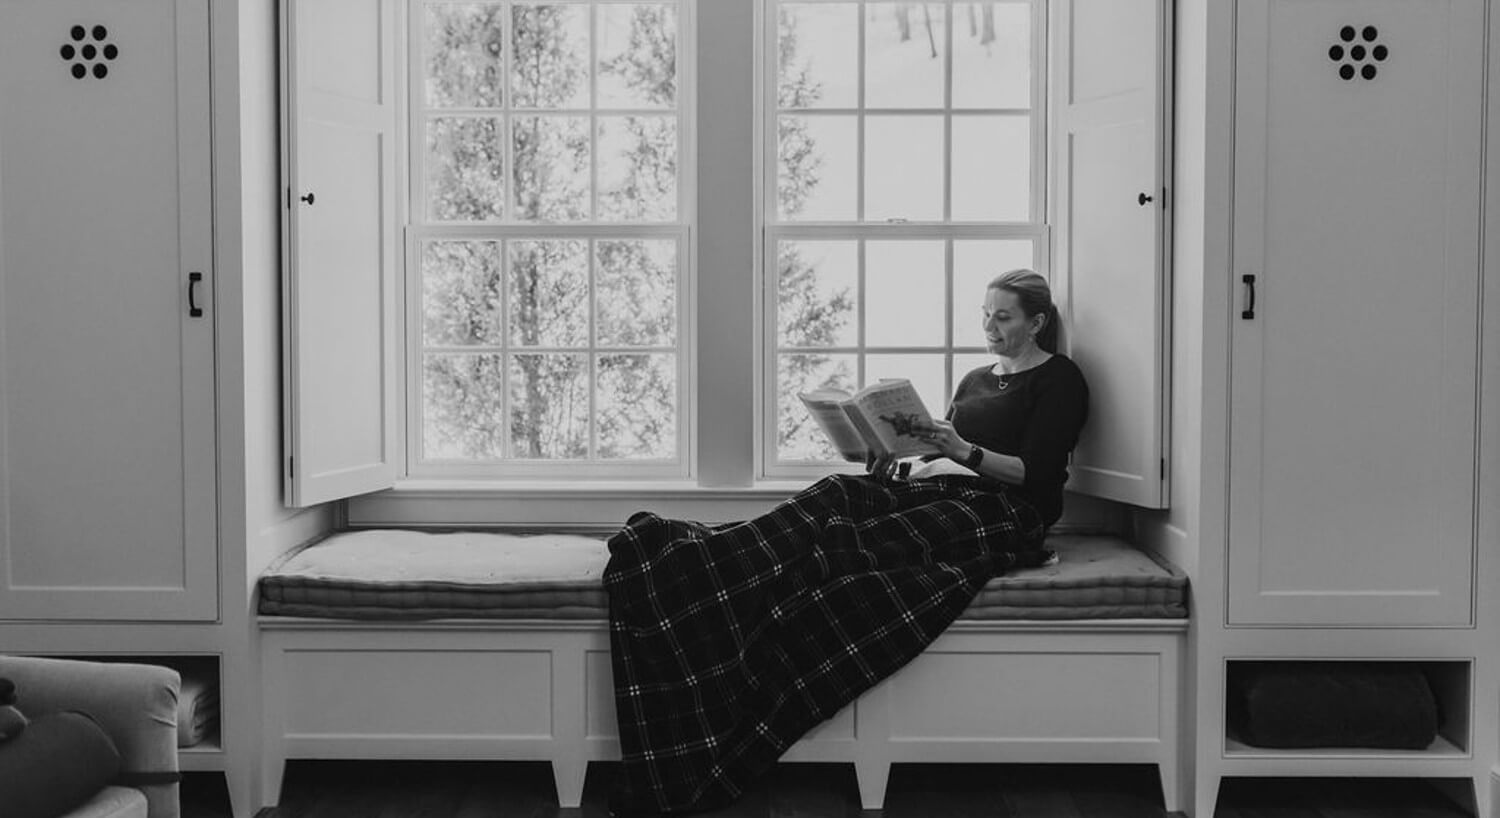 A woman under a blanket reading a book on a bench below a large window with shutters